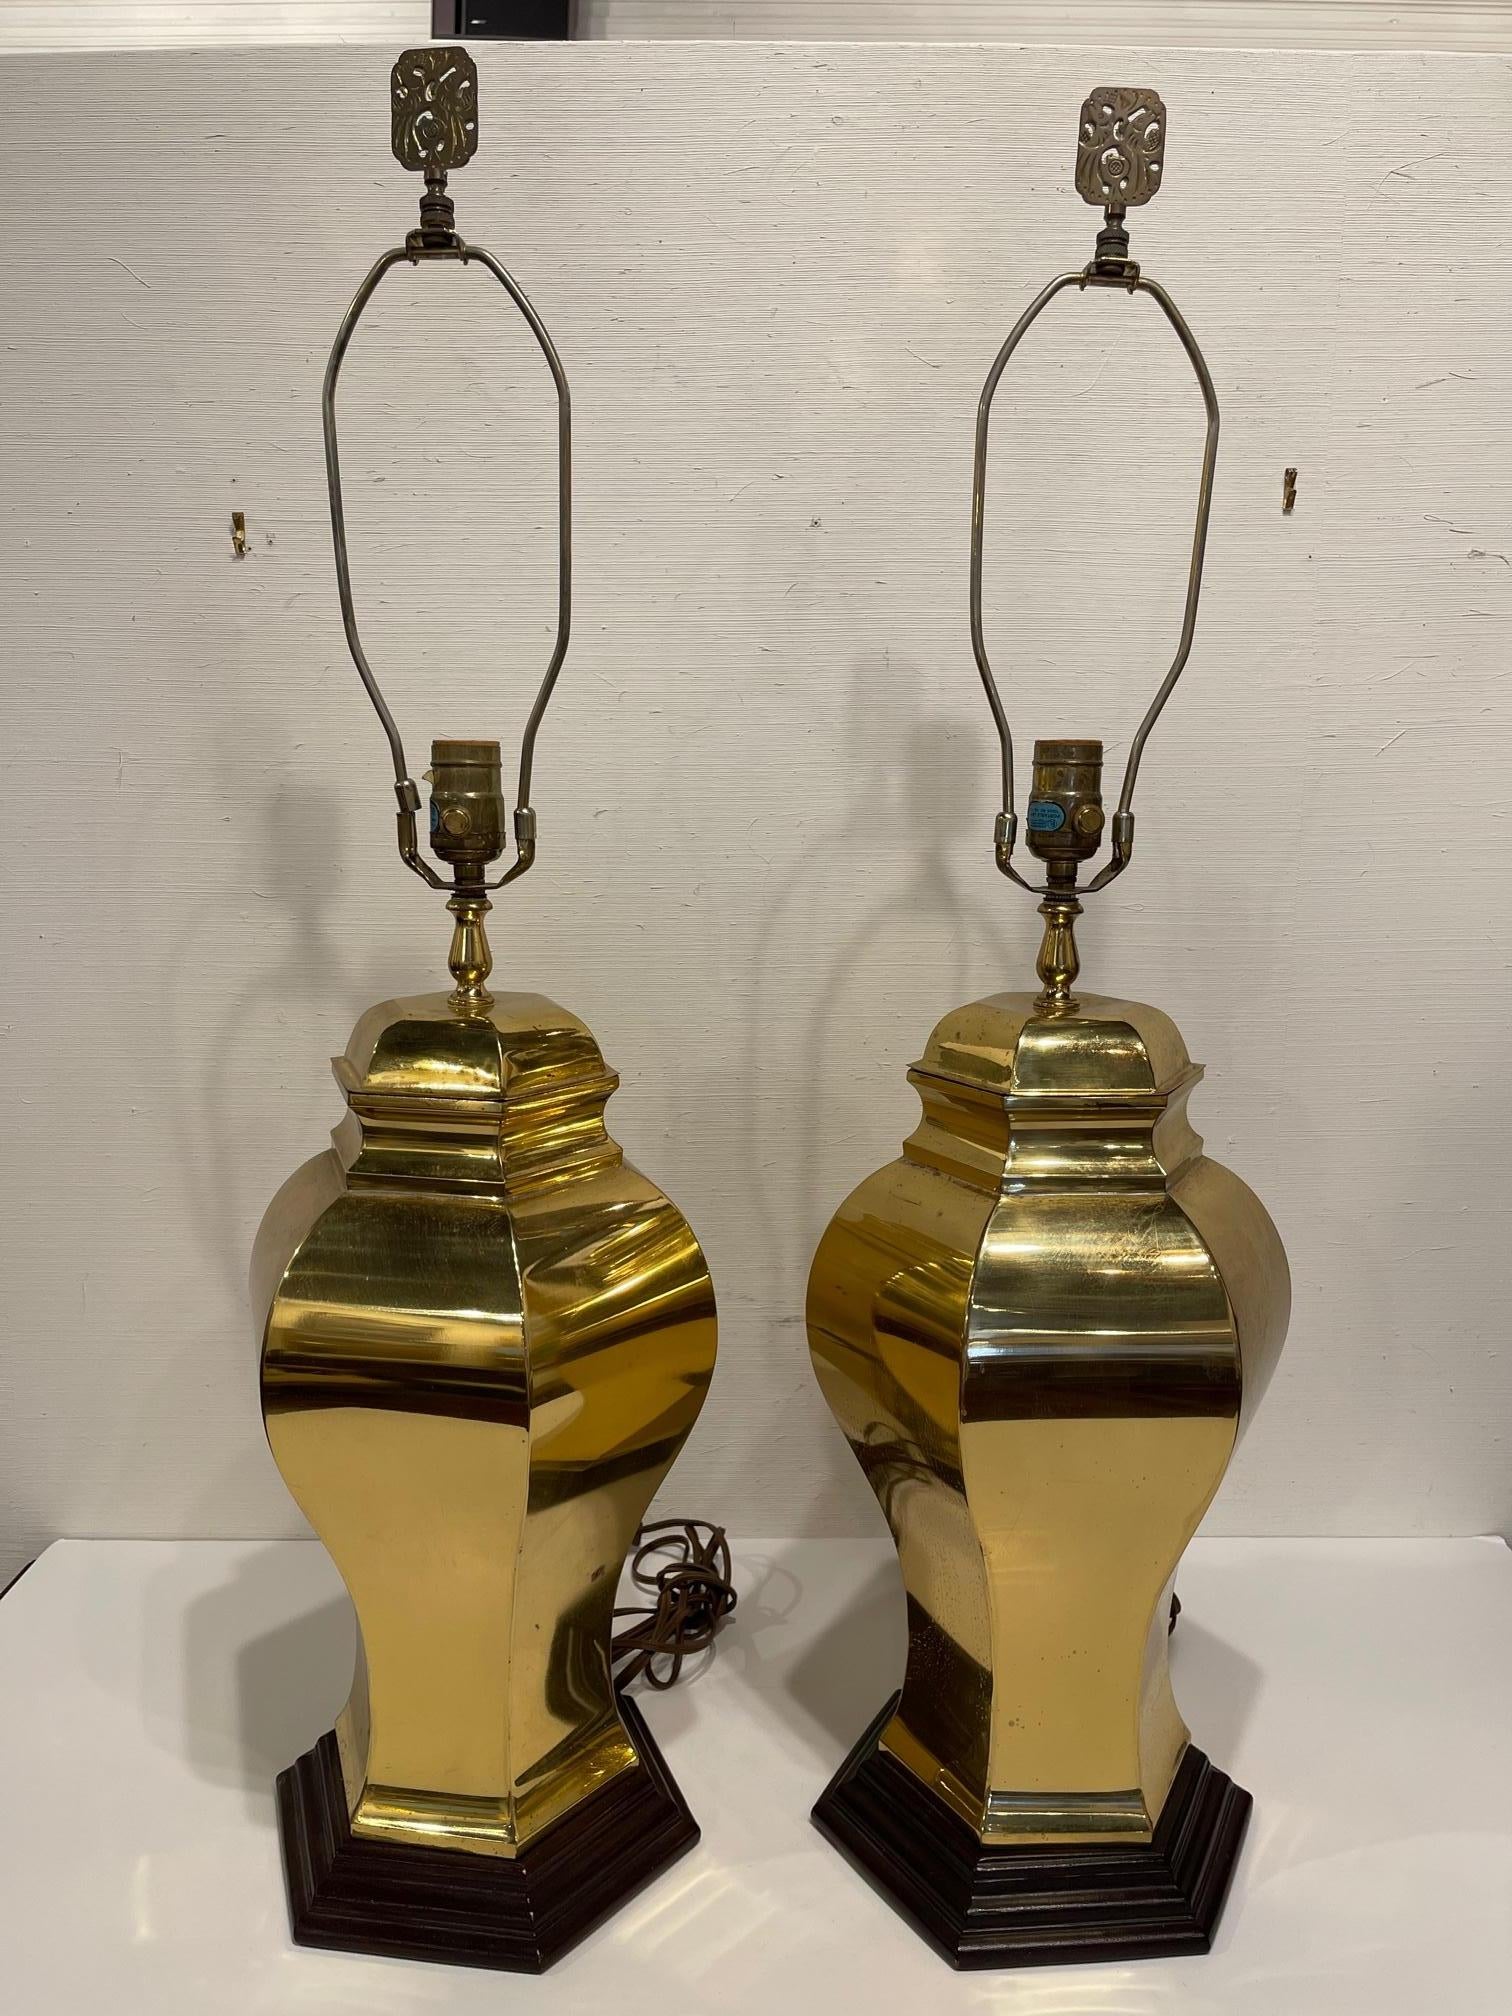 Pair of mid-century brass lamps on wood bases, 20th century.